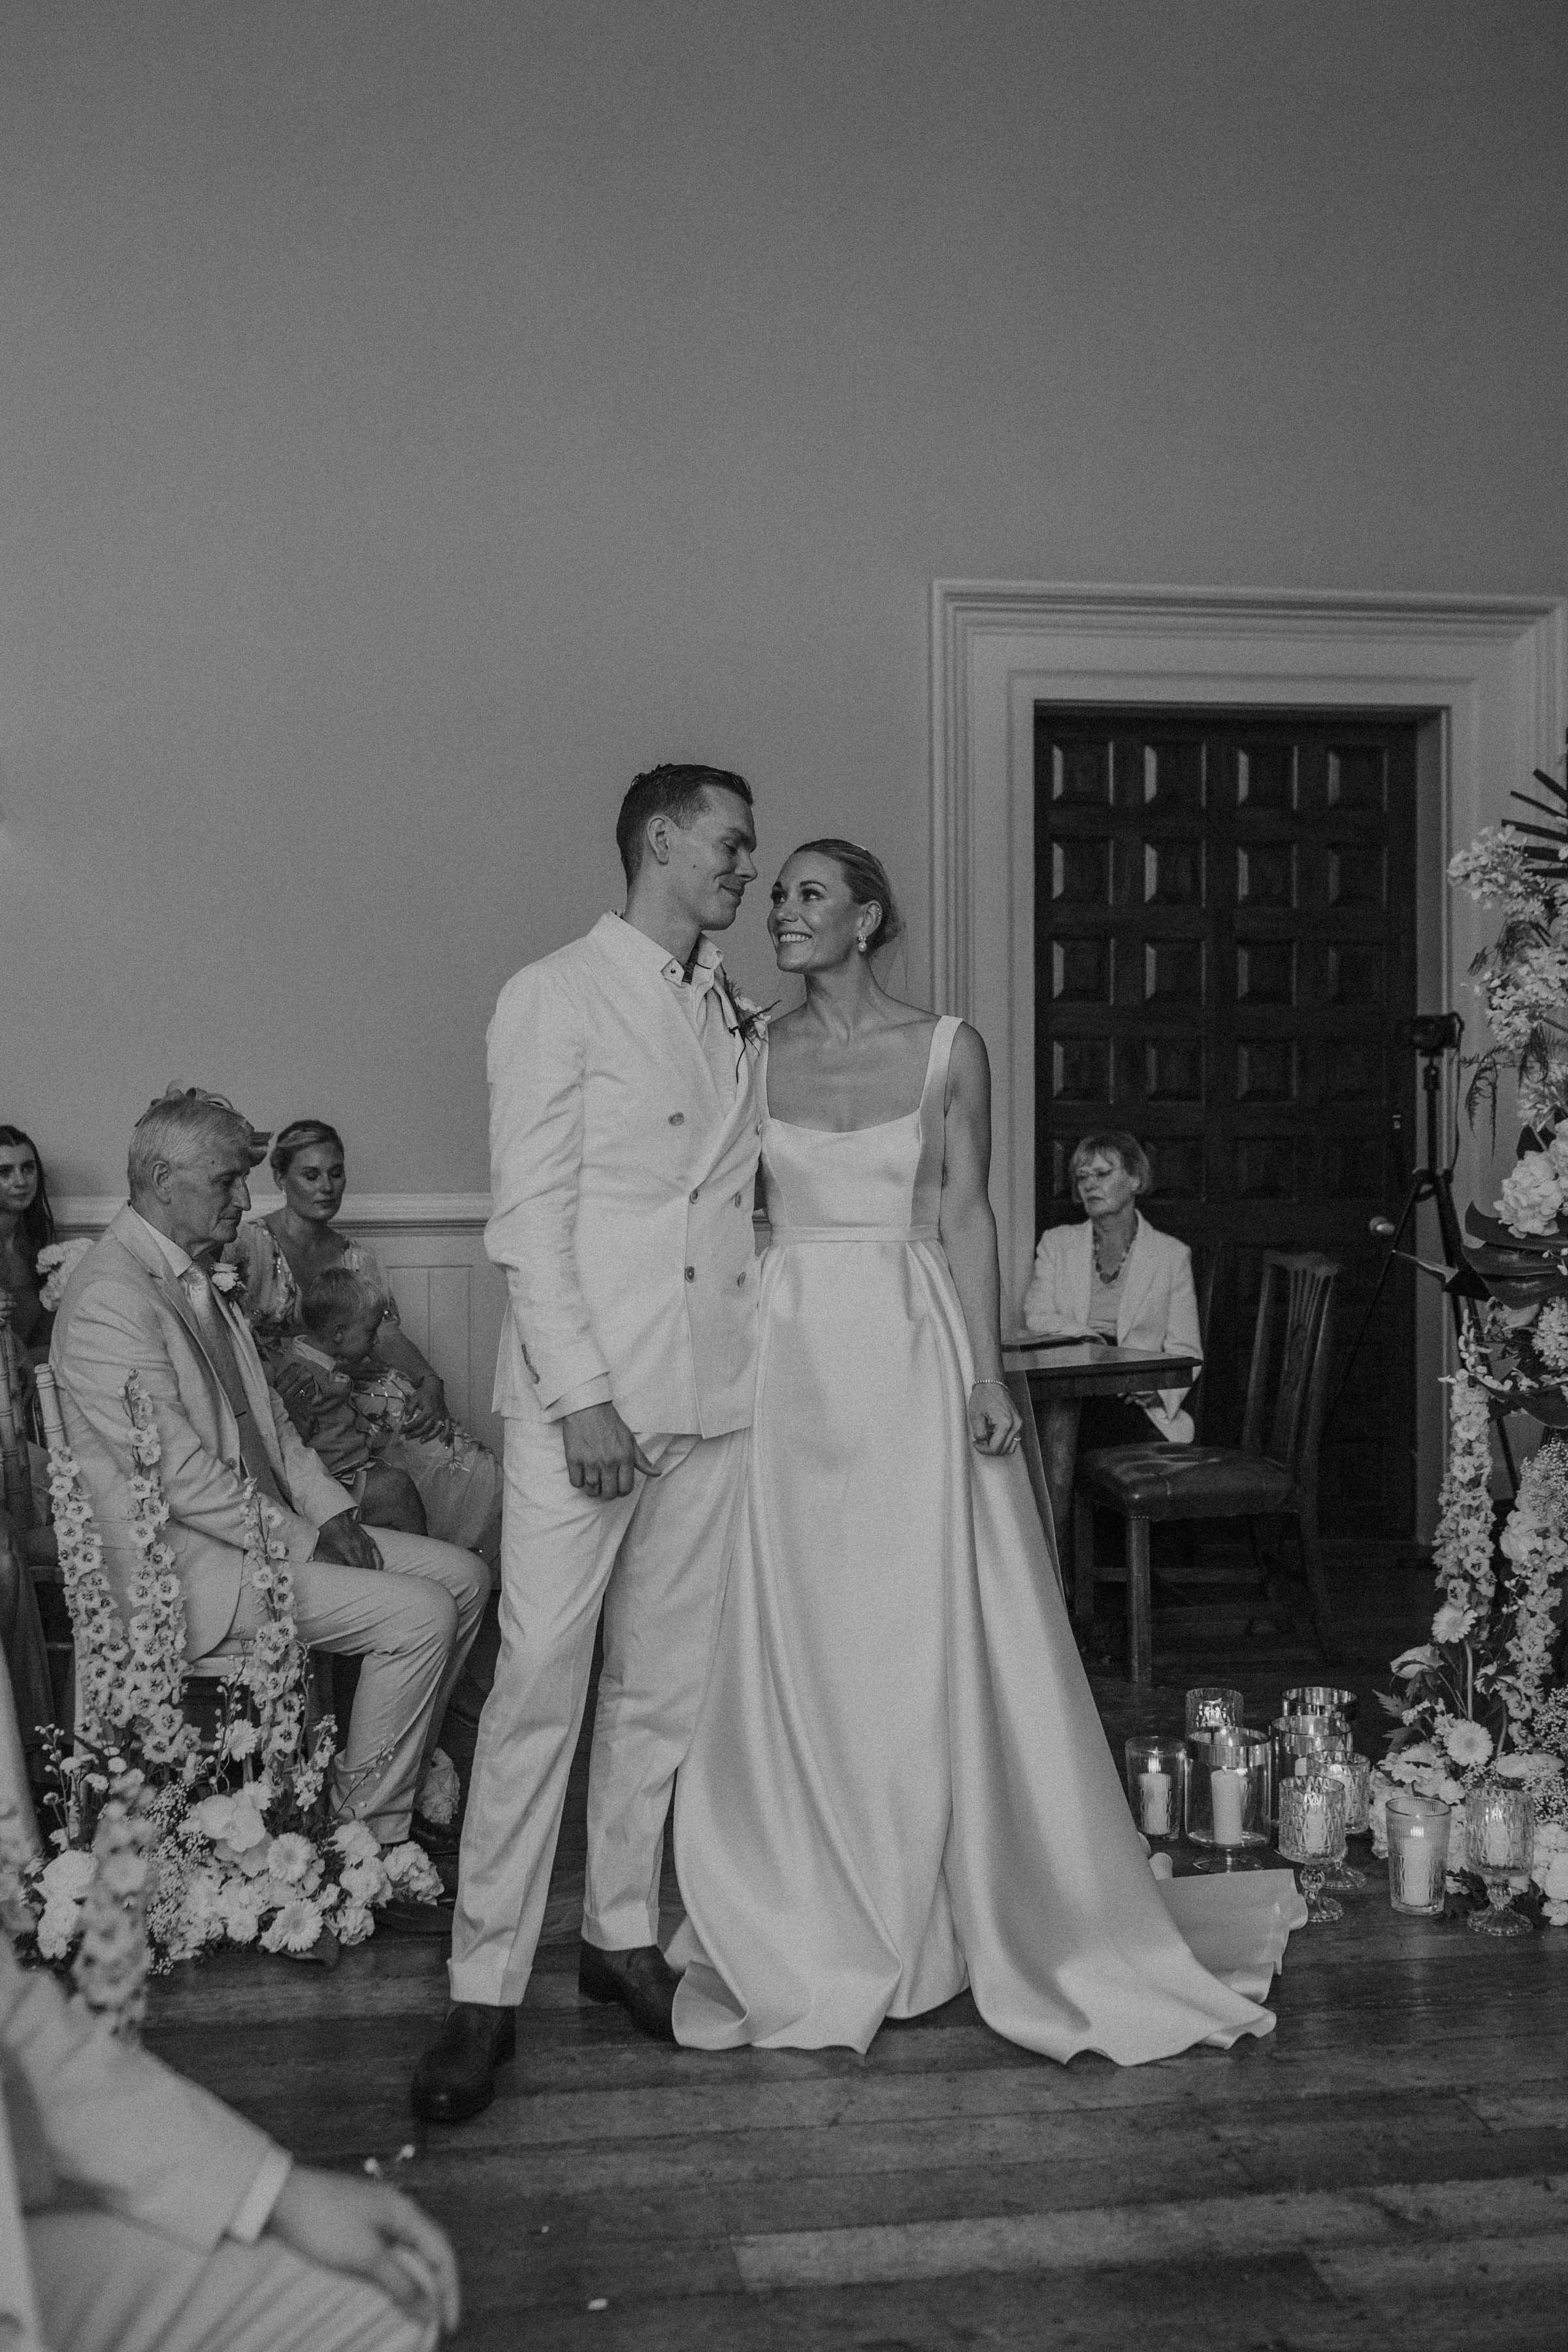 Beautiful bride Danielle wore the Dahlia wedding dress and bow by Halfpenny London